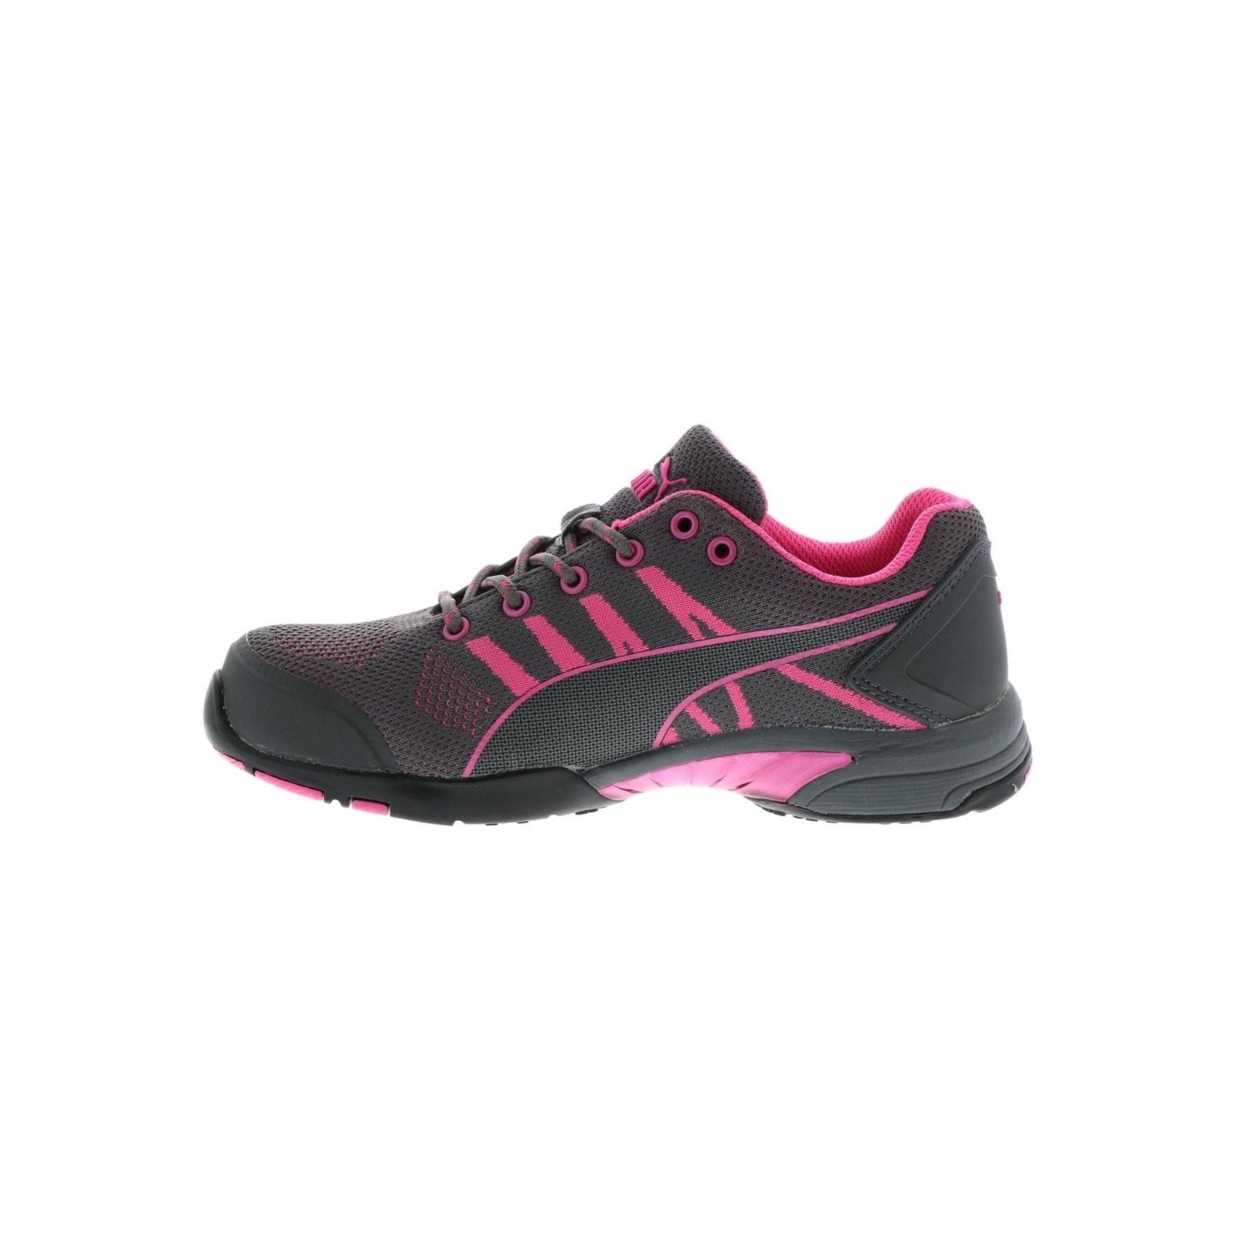 PUMA Safety Women's Celerity Knit Low Steel Toe ESD Work Shoe Pink - 642915 ONE SIZE PINK - PINK, 9